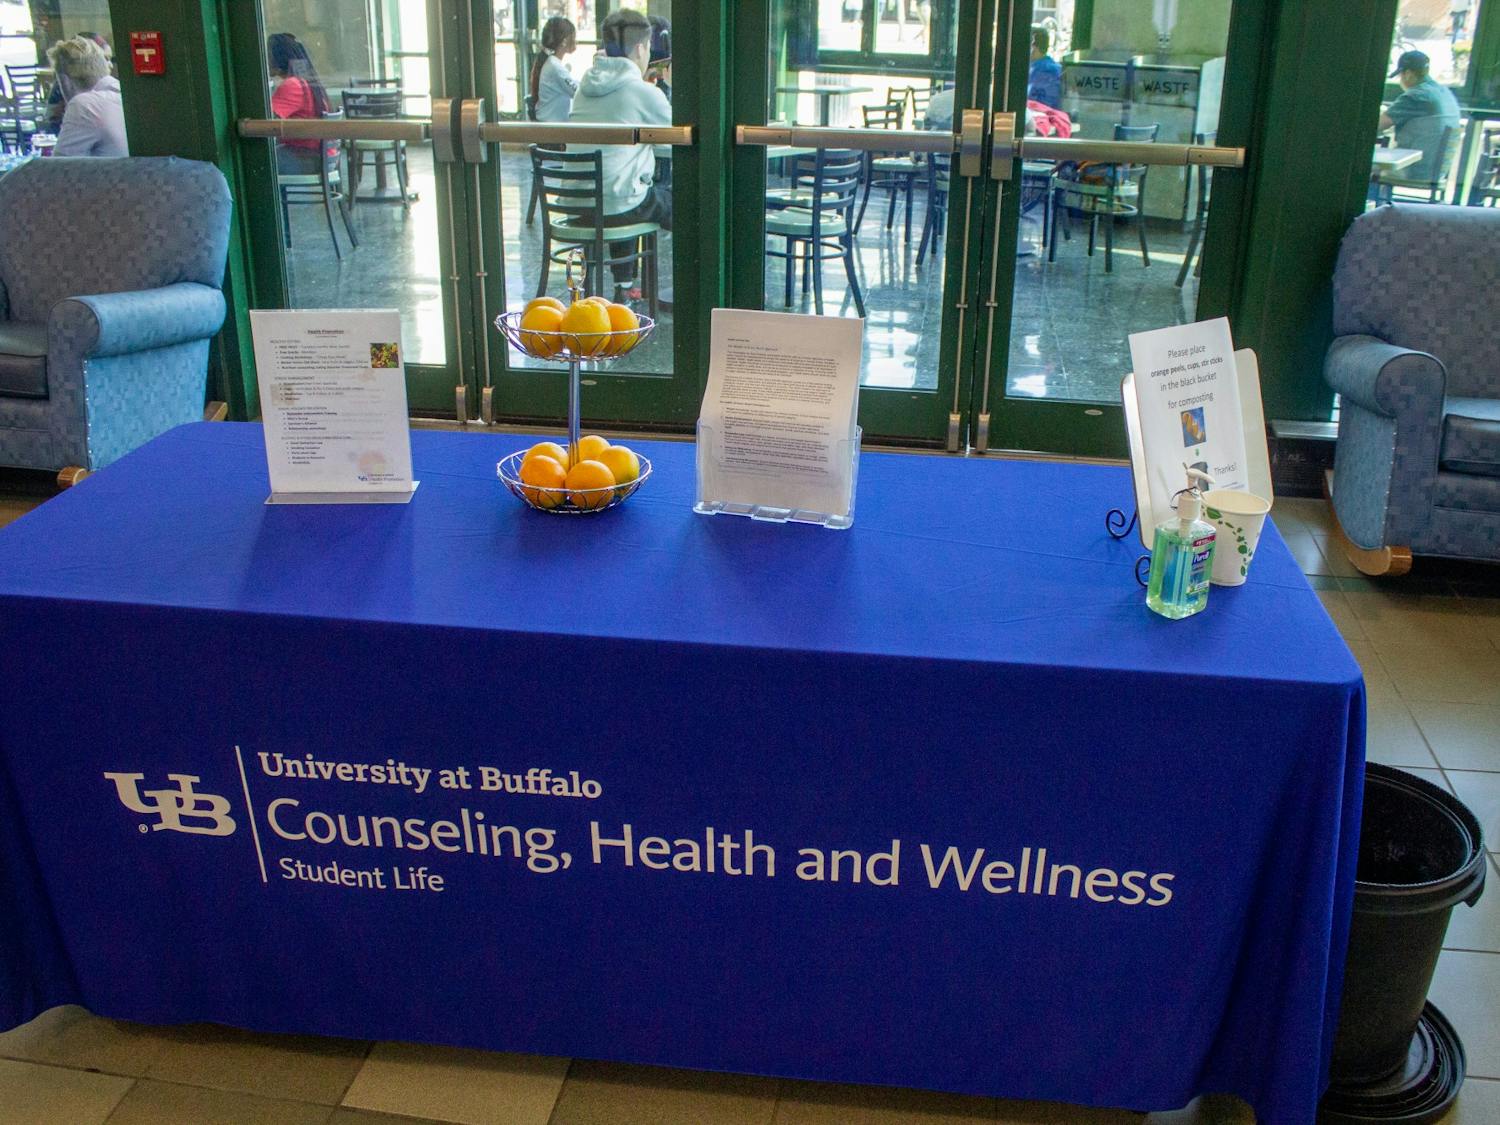 A Counseling, Health and Wellness booth provides information on healthy living.